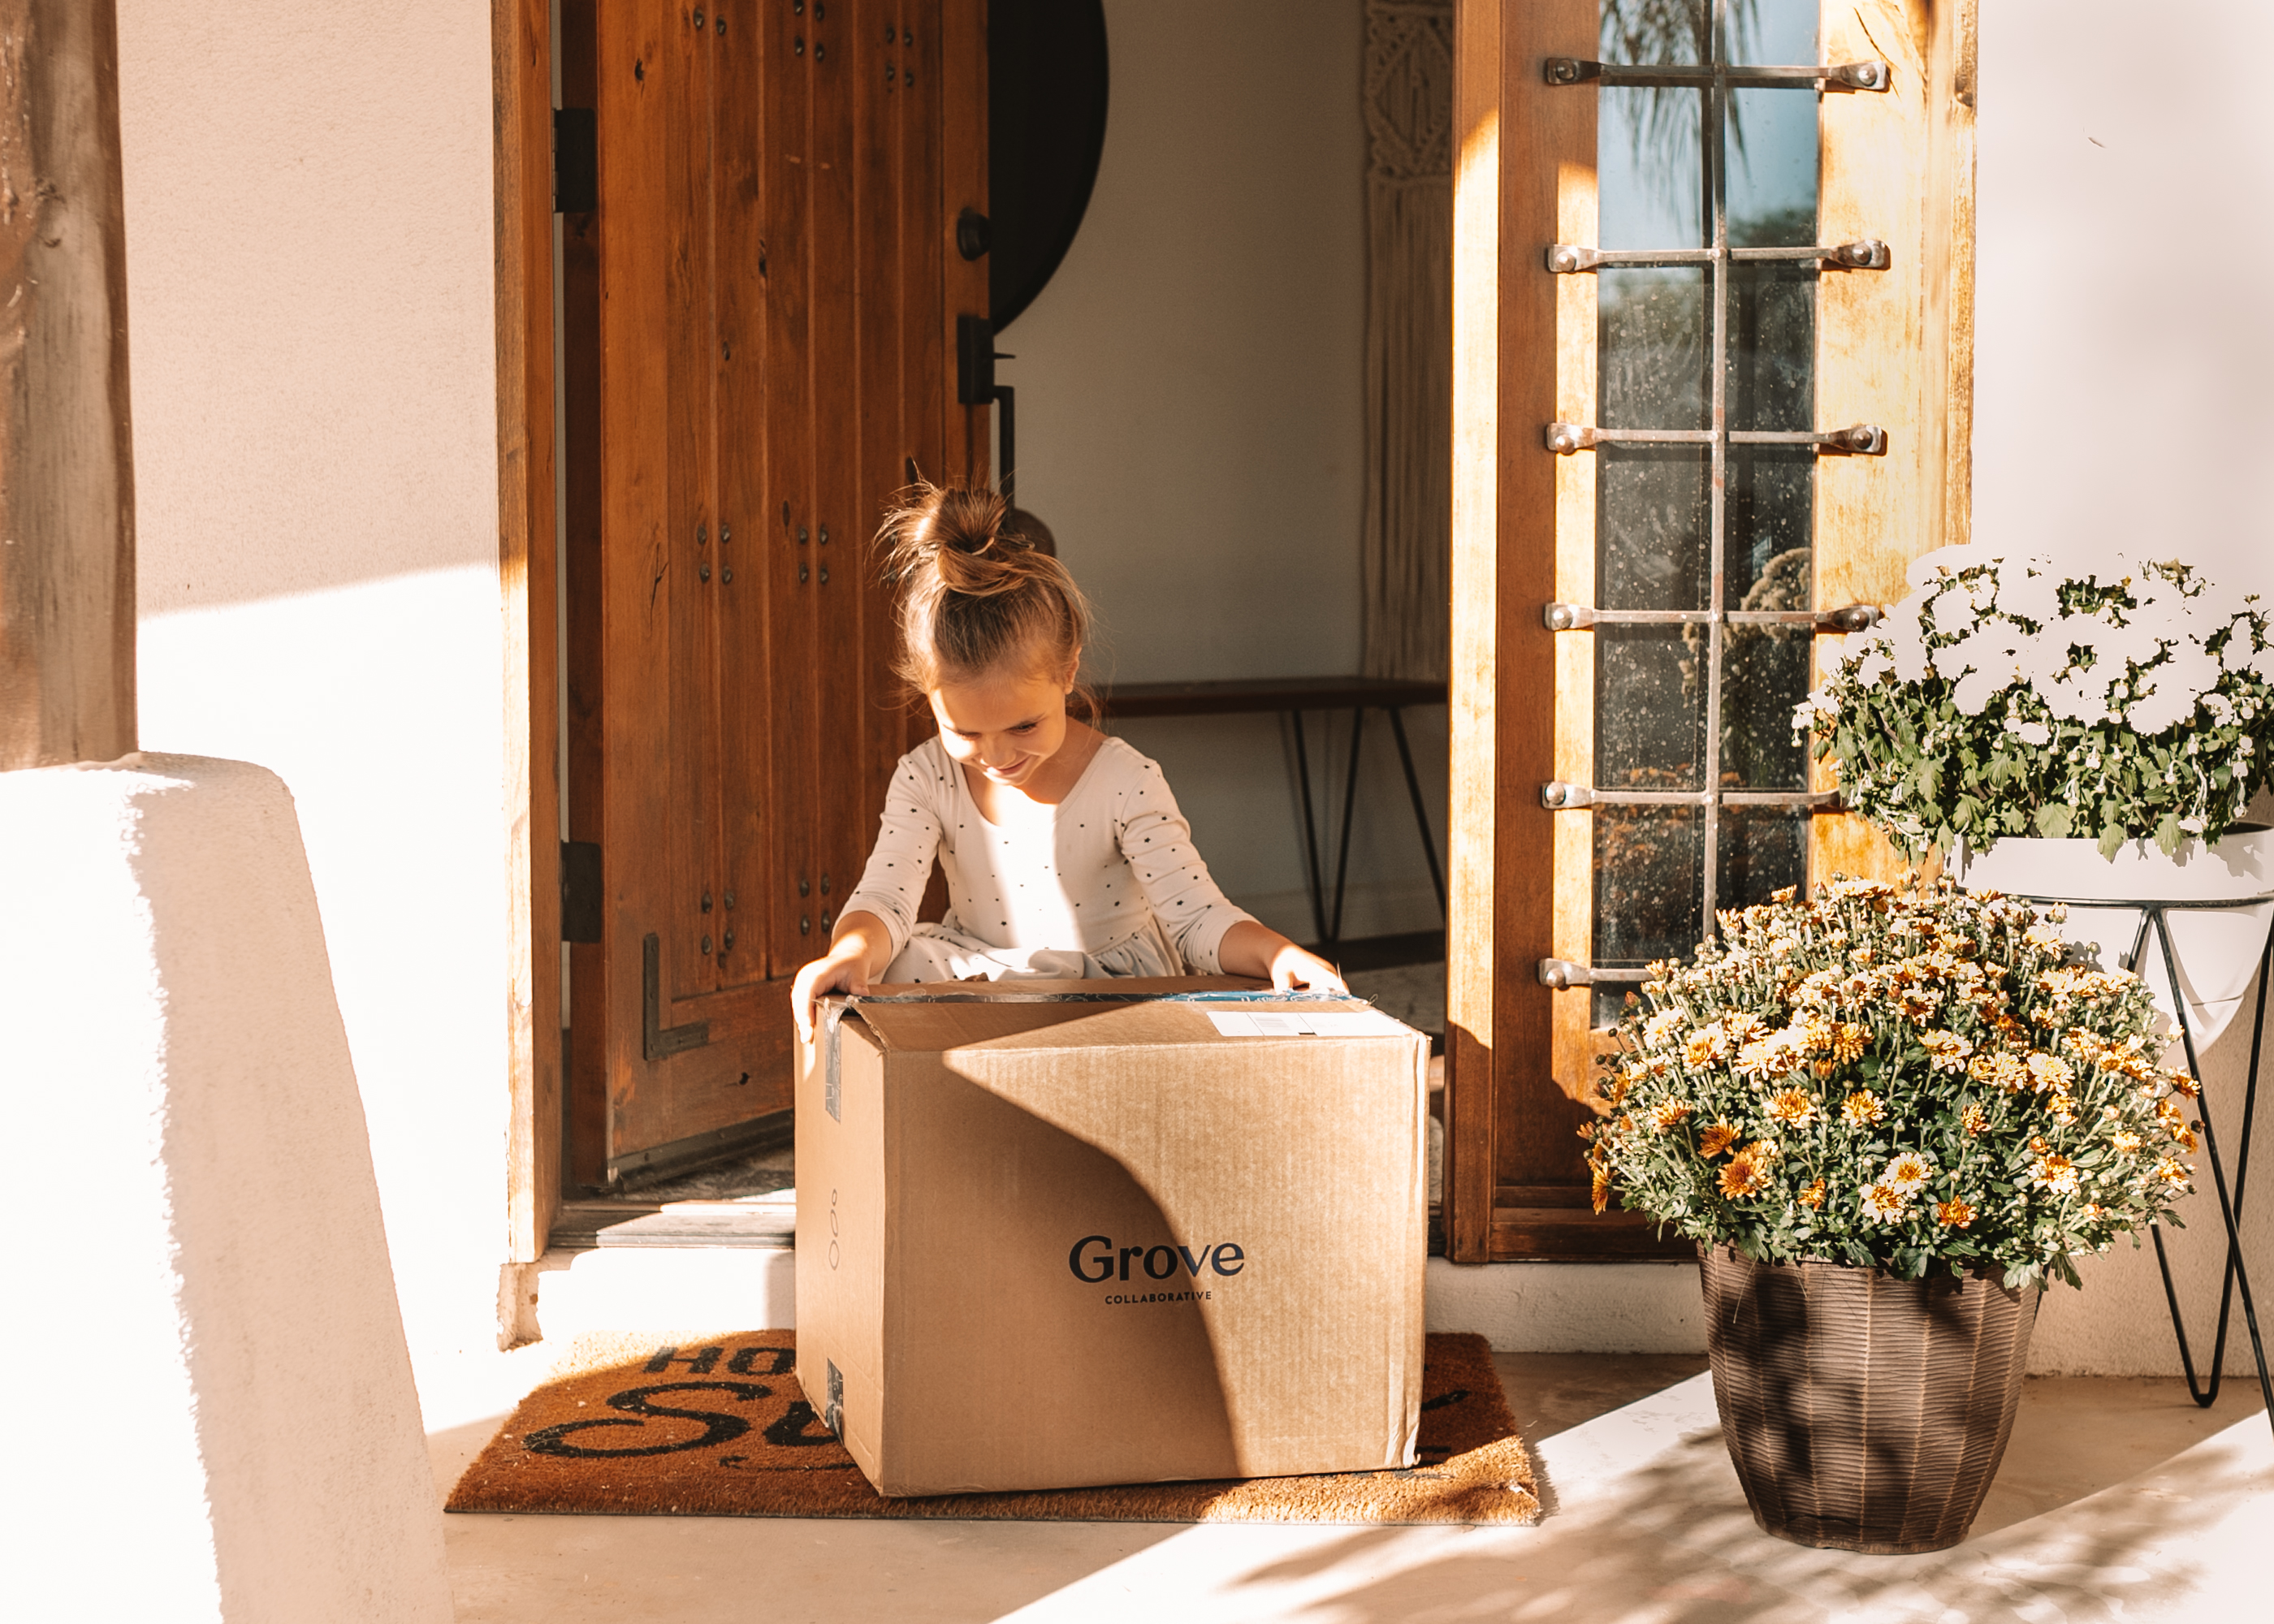 healthy and sustainable products for home, delivered right to our door from Grove Collaborative! #thelovedesignedlife #grovecollaborative #healthyliving